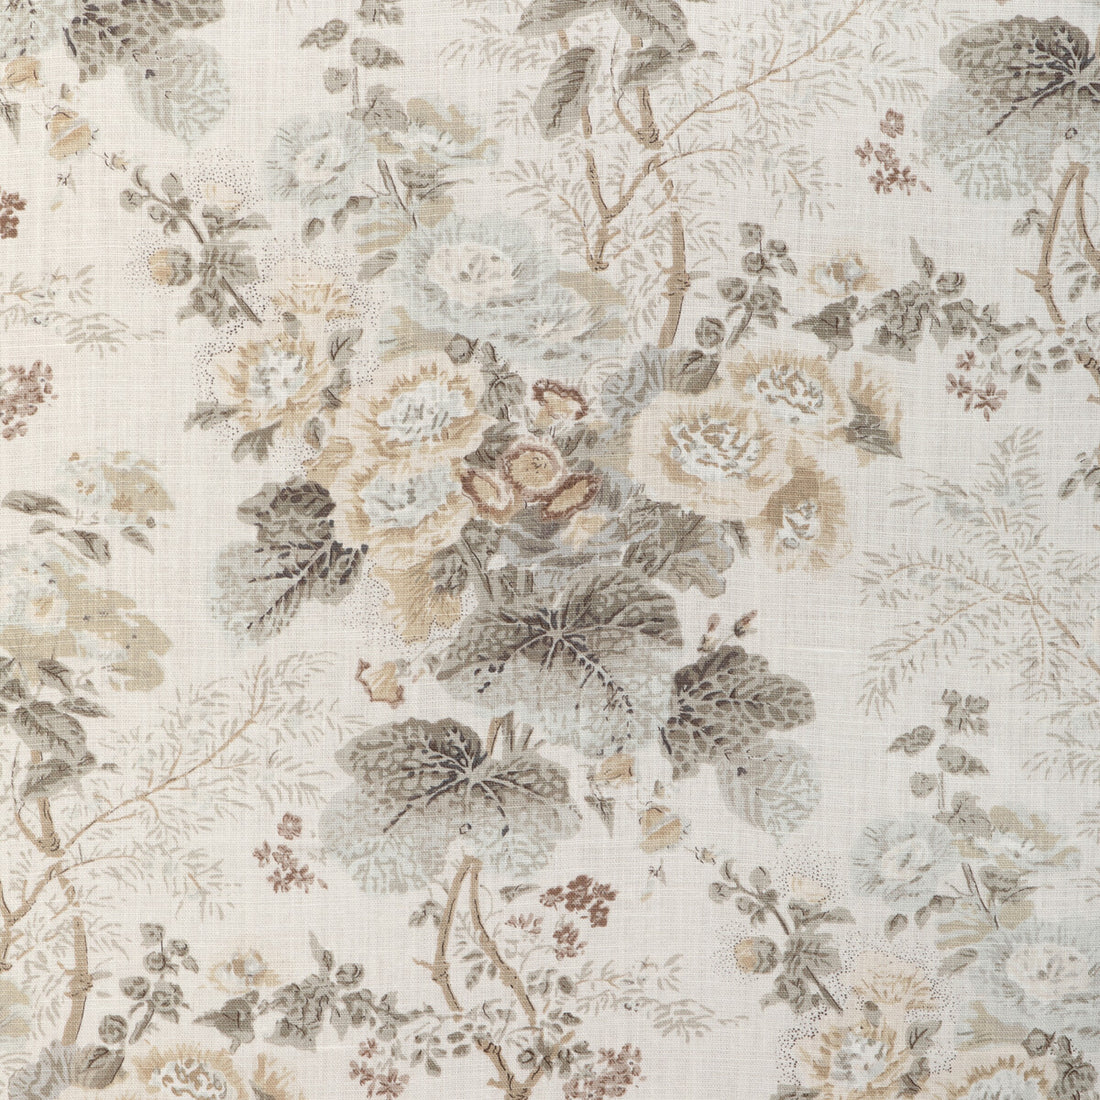 Althea Linen fabric in stone color - pattern 2023117.1611.0 - by Lee Jofa in the Lee Jofa 200 collection